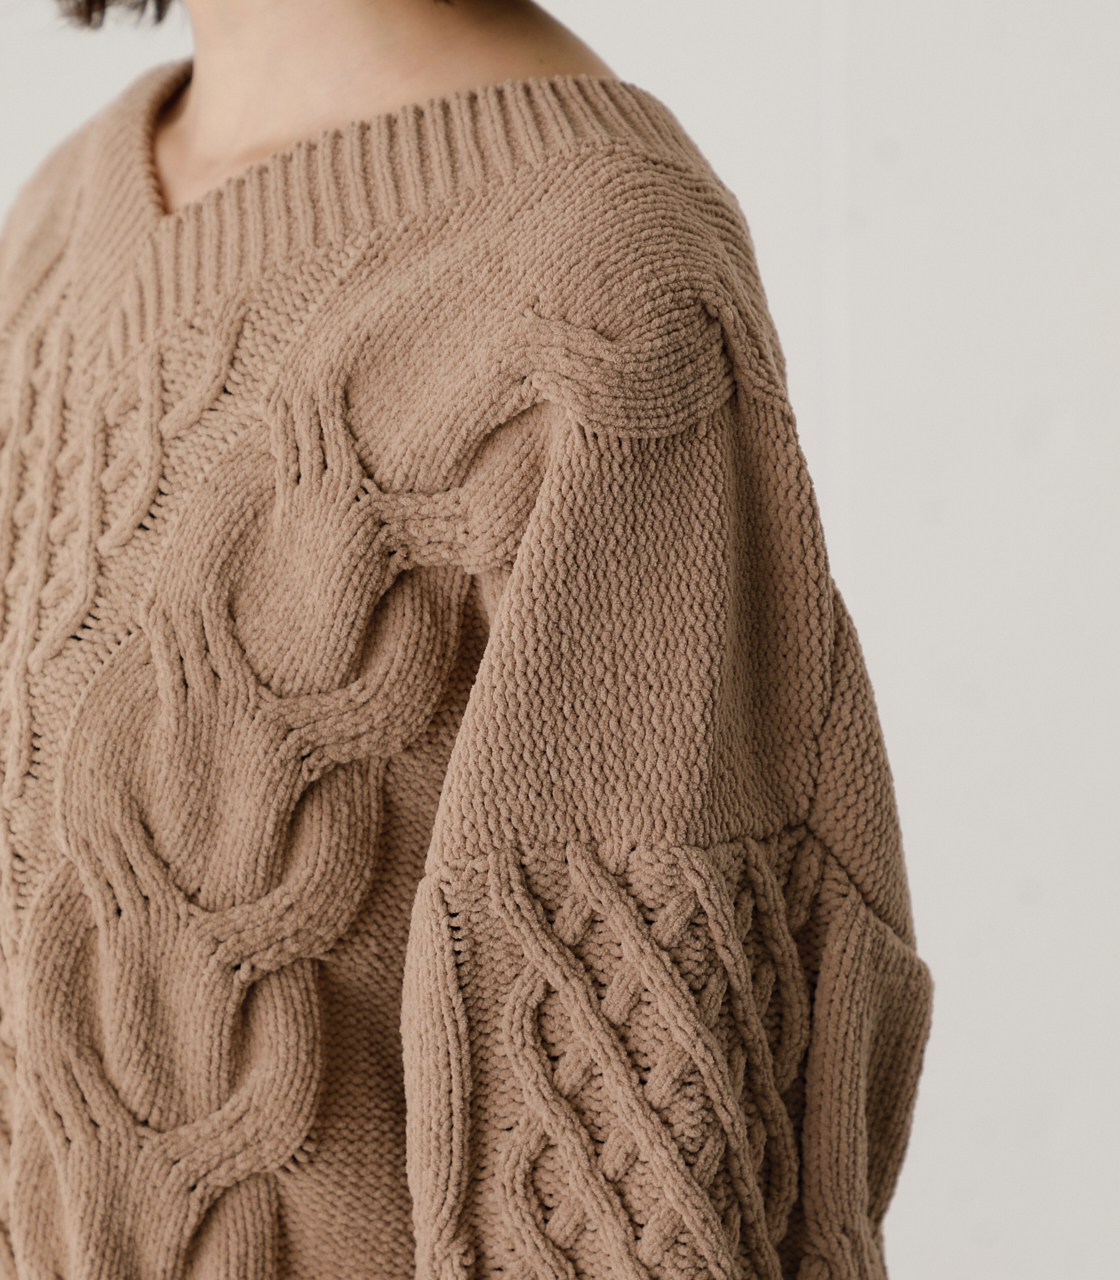 CHENILLE CABLE V/N KNIT TOPS/シェニールケーブルVネックニットトップス 詳細画像 BEG 8